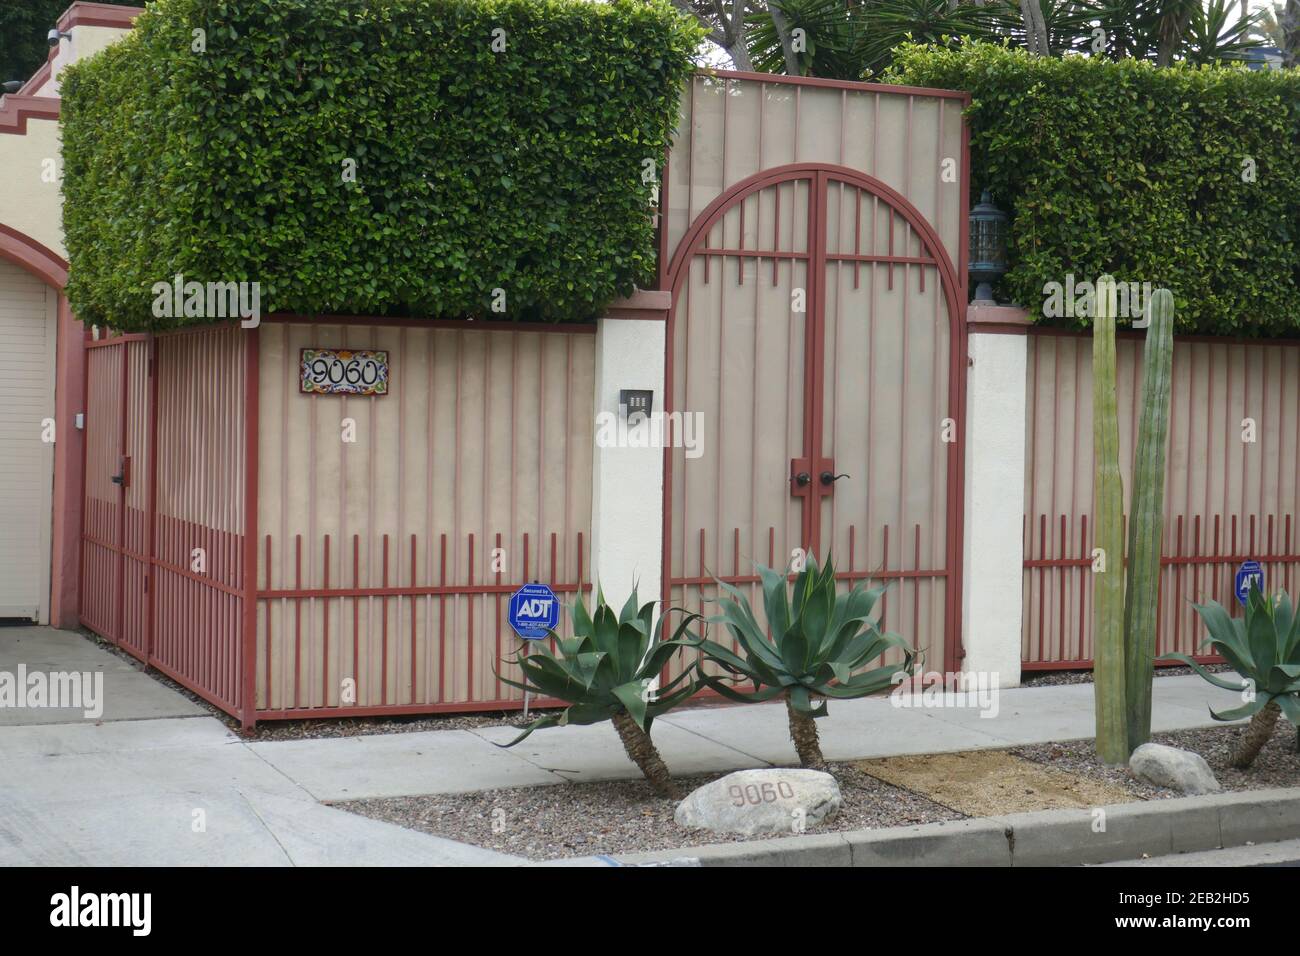 West Hollywood, California, USA 11th February 2021 A general view of atmosphere of former home/house of Singer Dolly Parton and actress Natalie Wood at 9069 Harland Avenue on February 11, 2021 in West Hollywood, California, USA. Photo by Barry King/Alamy Stock Photo Stock Photo